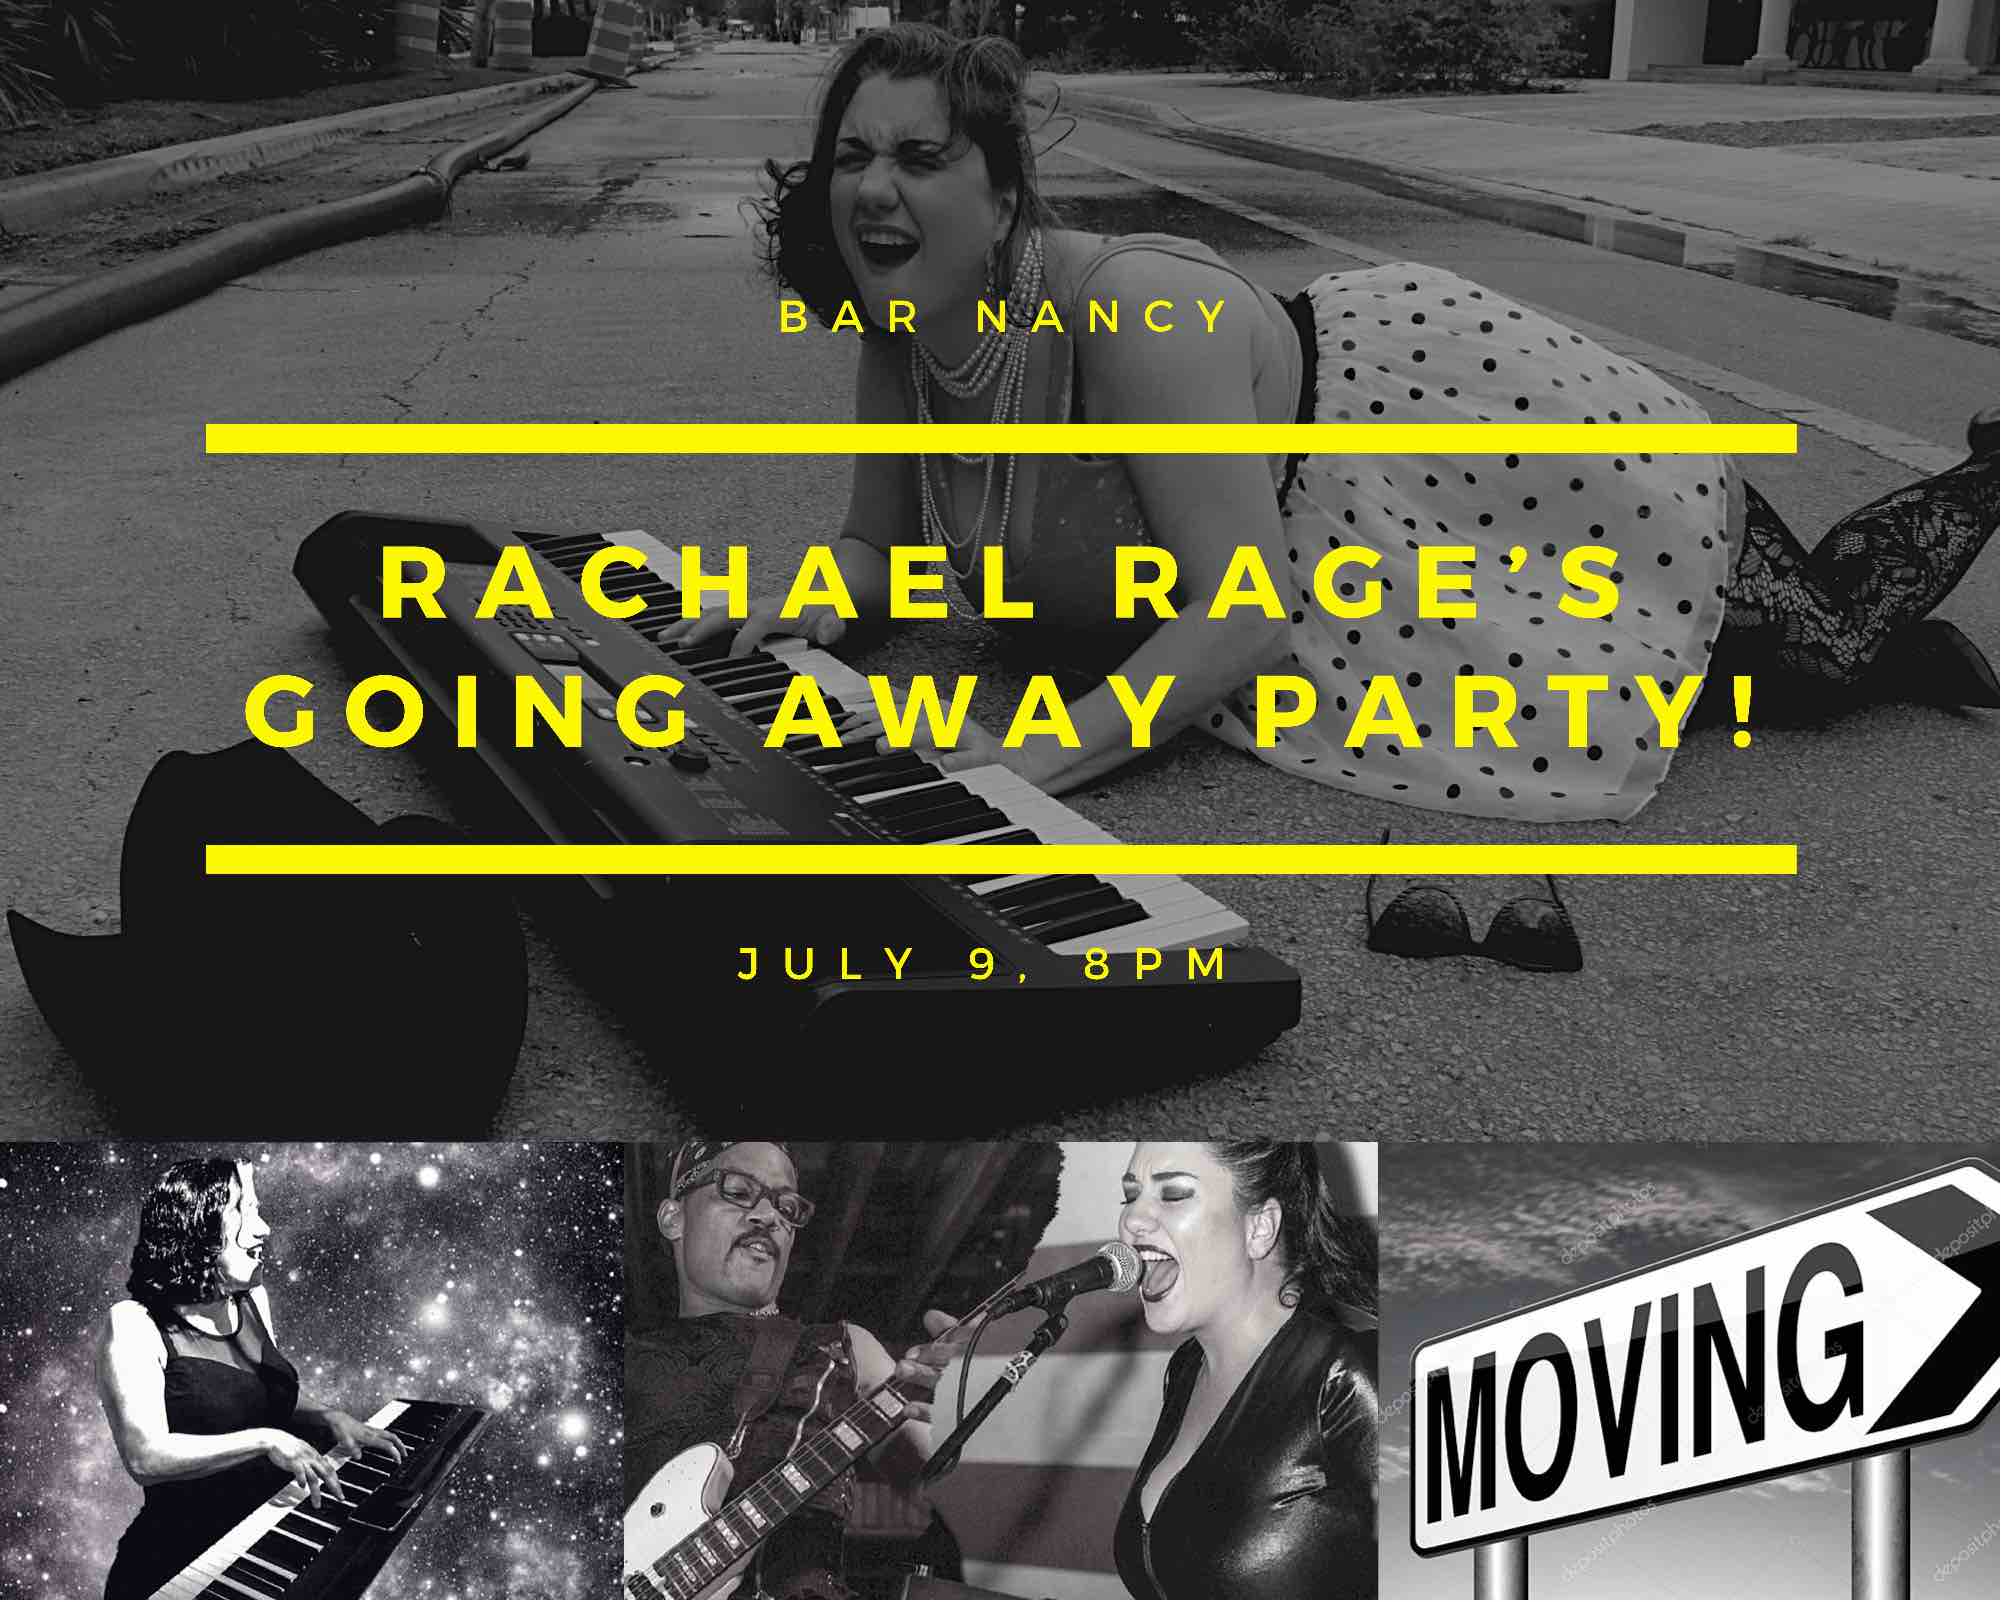 Rachael Rage's Going away party at Bar Nancy - July 9th